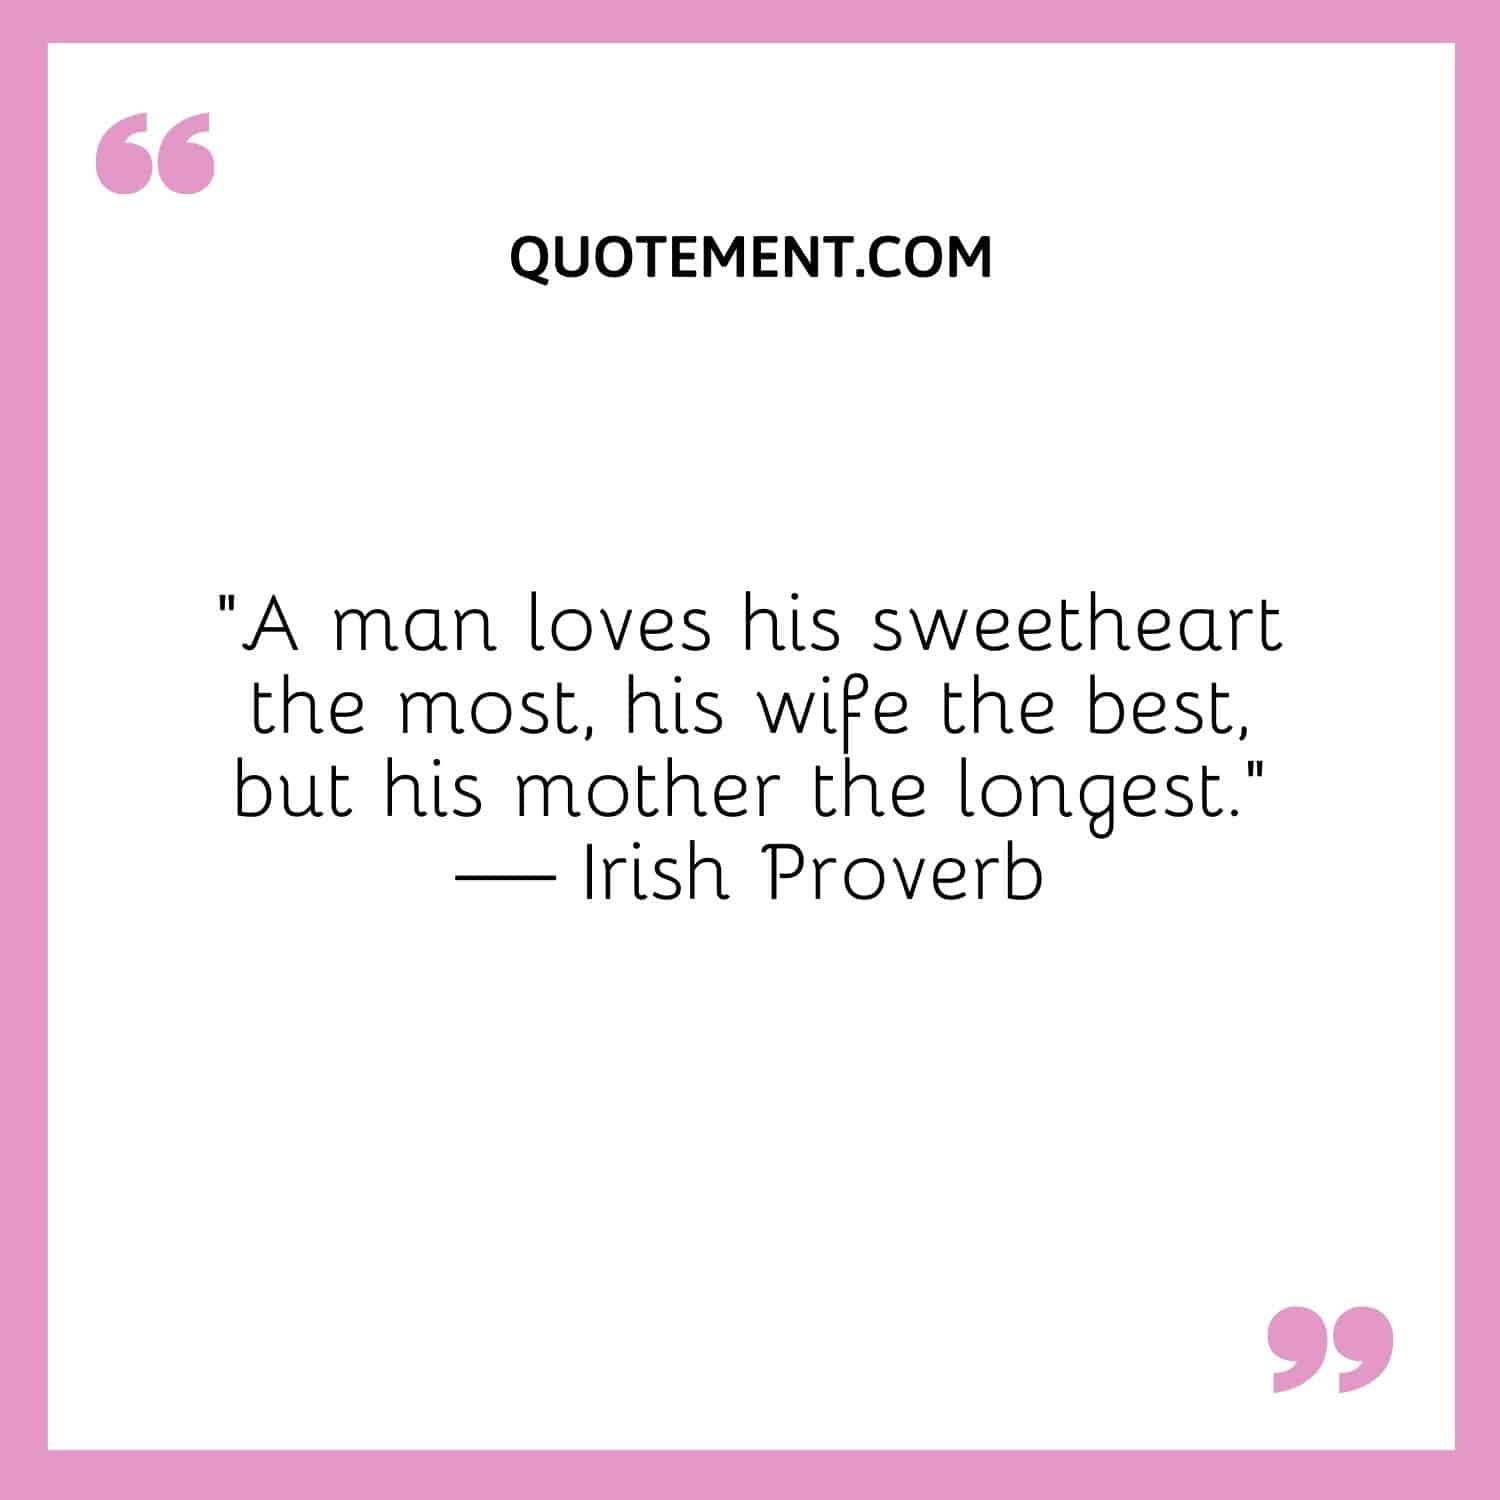 A man loves his sweetheart the most, his wife the best, but his mother the longest.